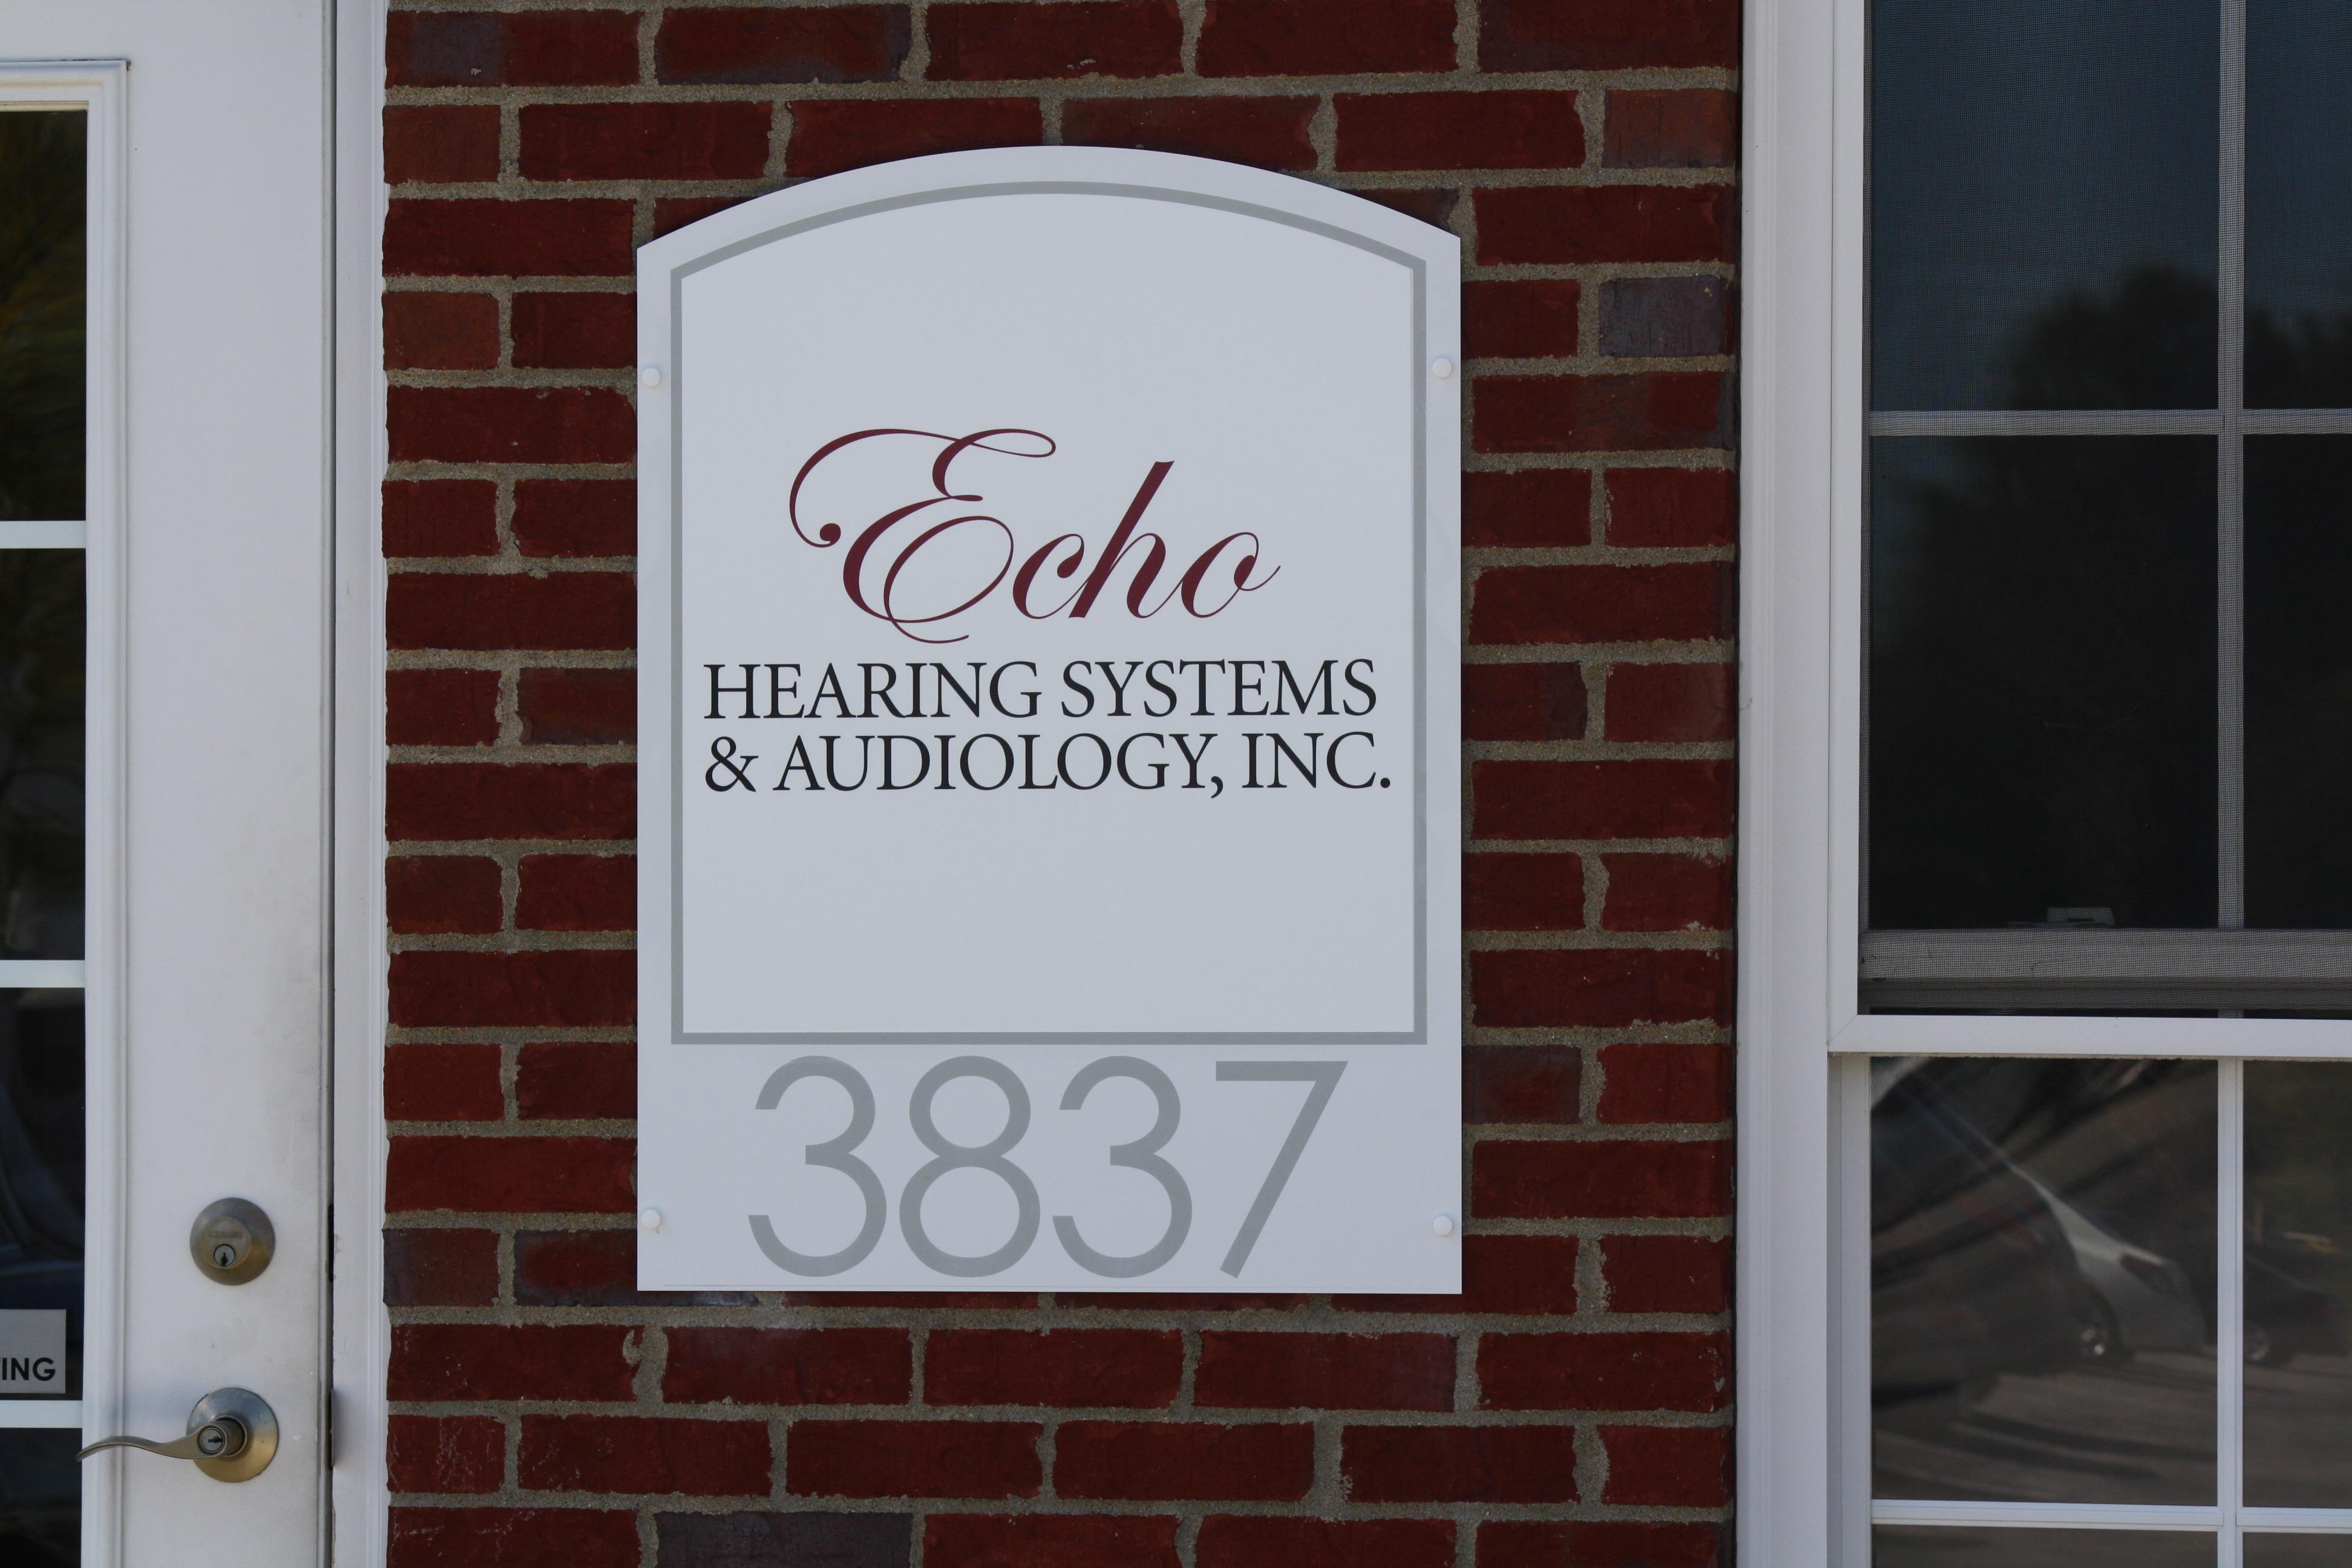 Echo Hearing Systems & Audiology, Inc. Photo